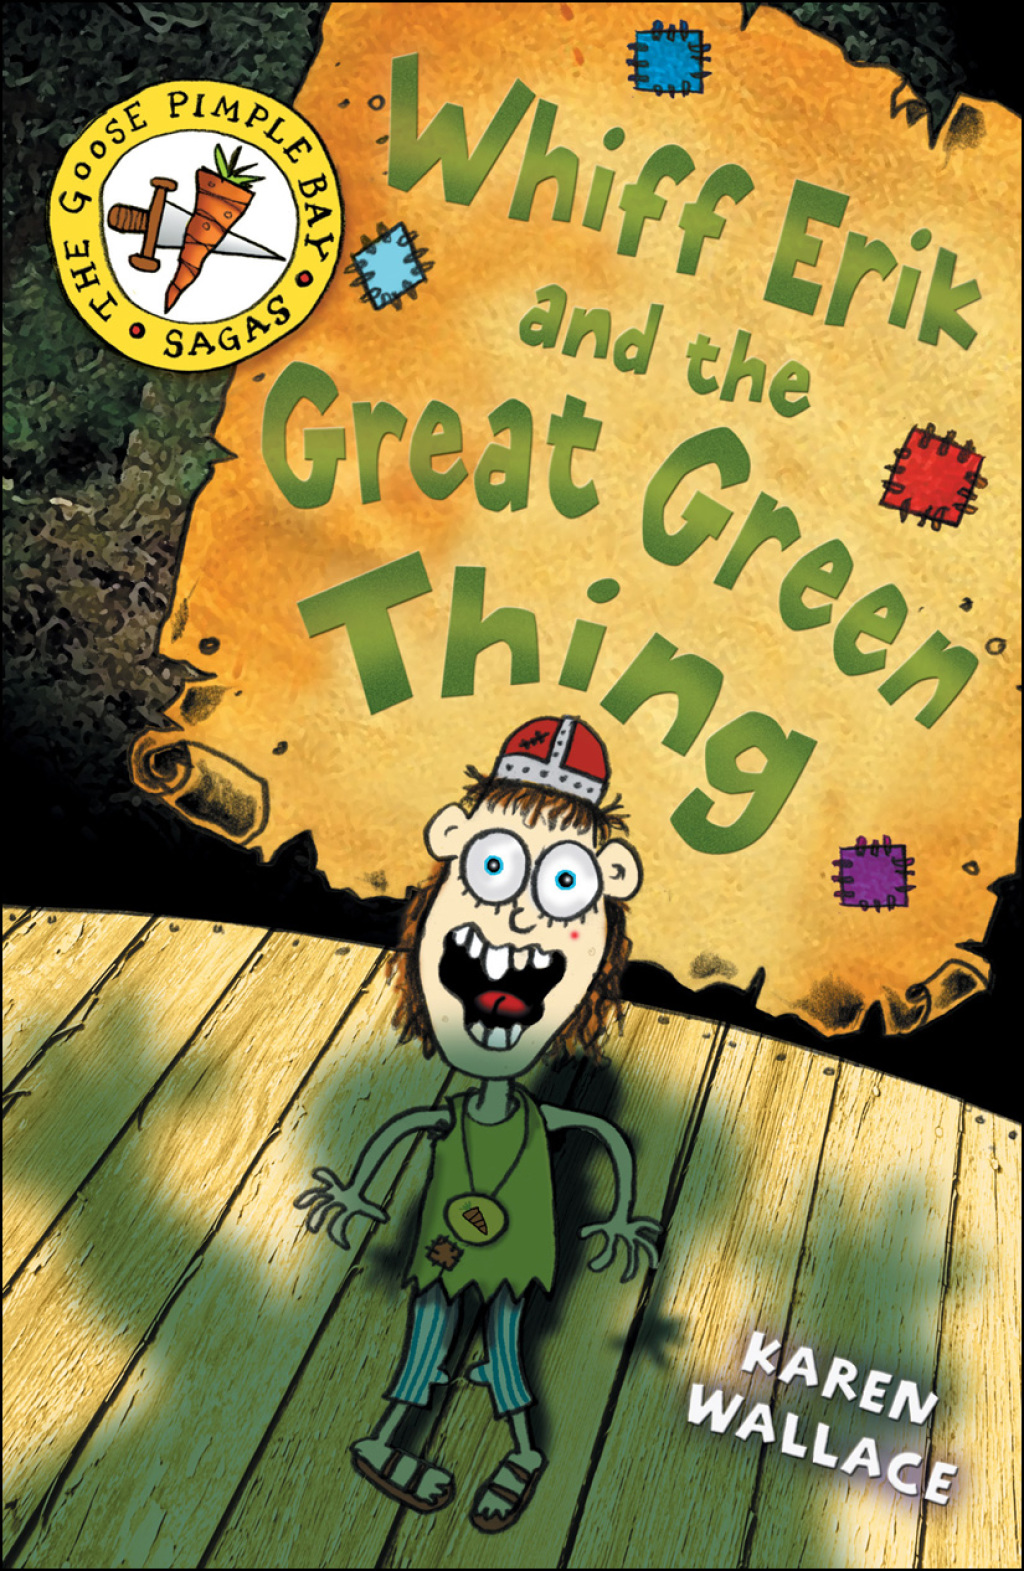 Whiff Erik and the Great Green Thing - 1st Edition (eBook)